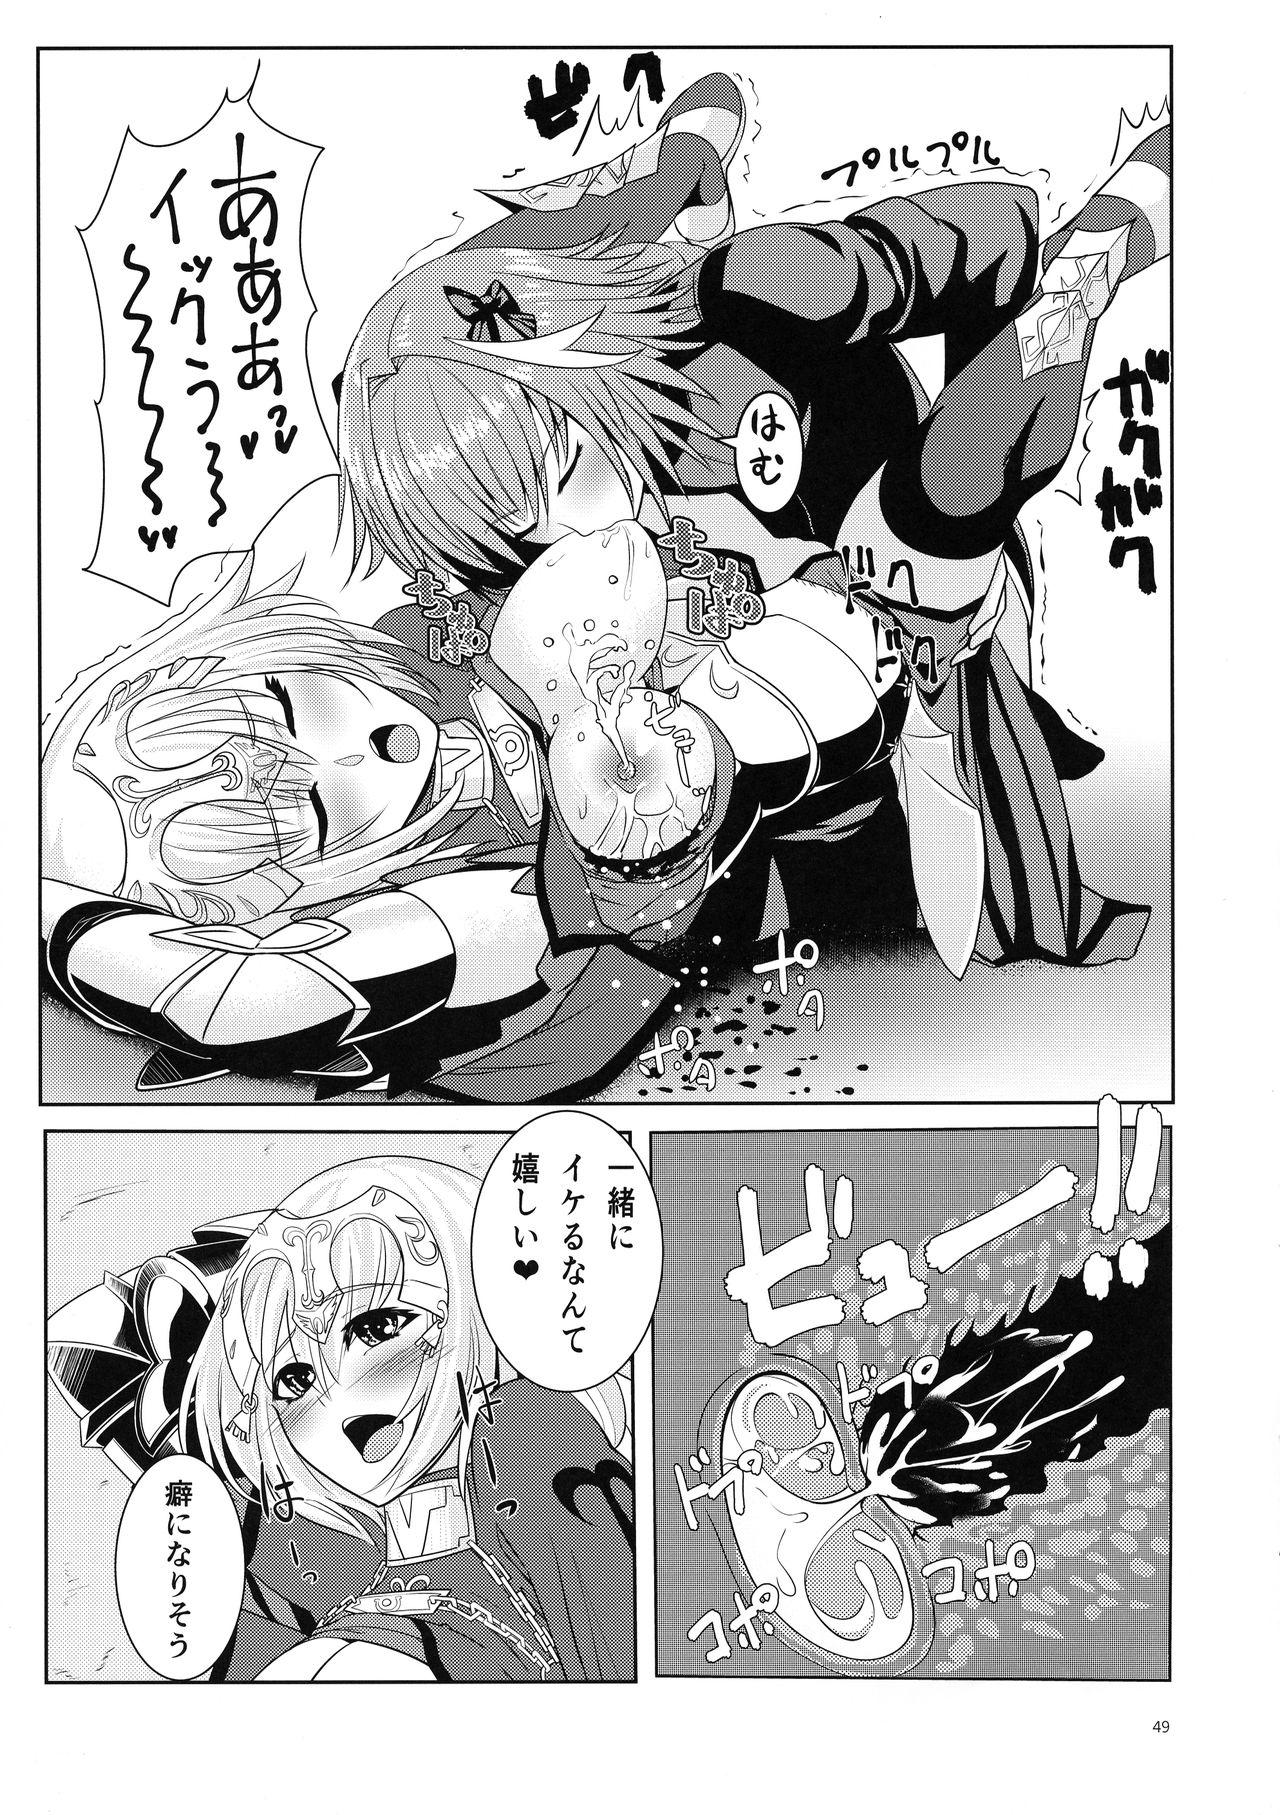 Matching Spirits - Jeanne and Astolfo have sex 45